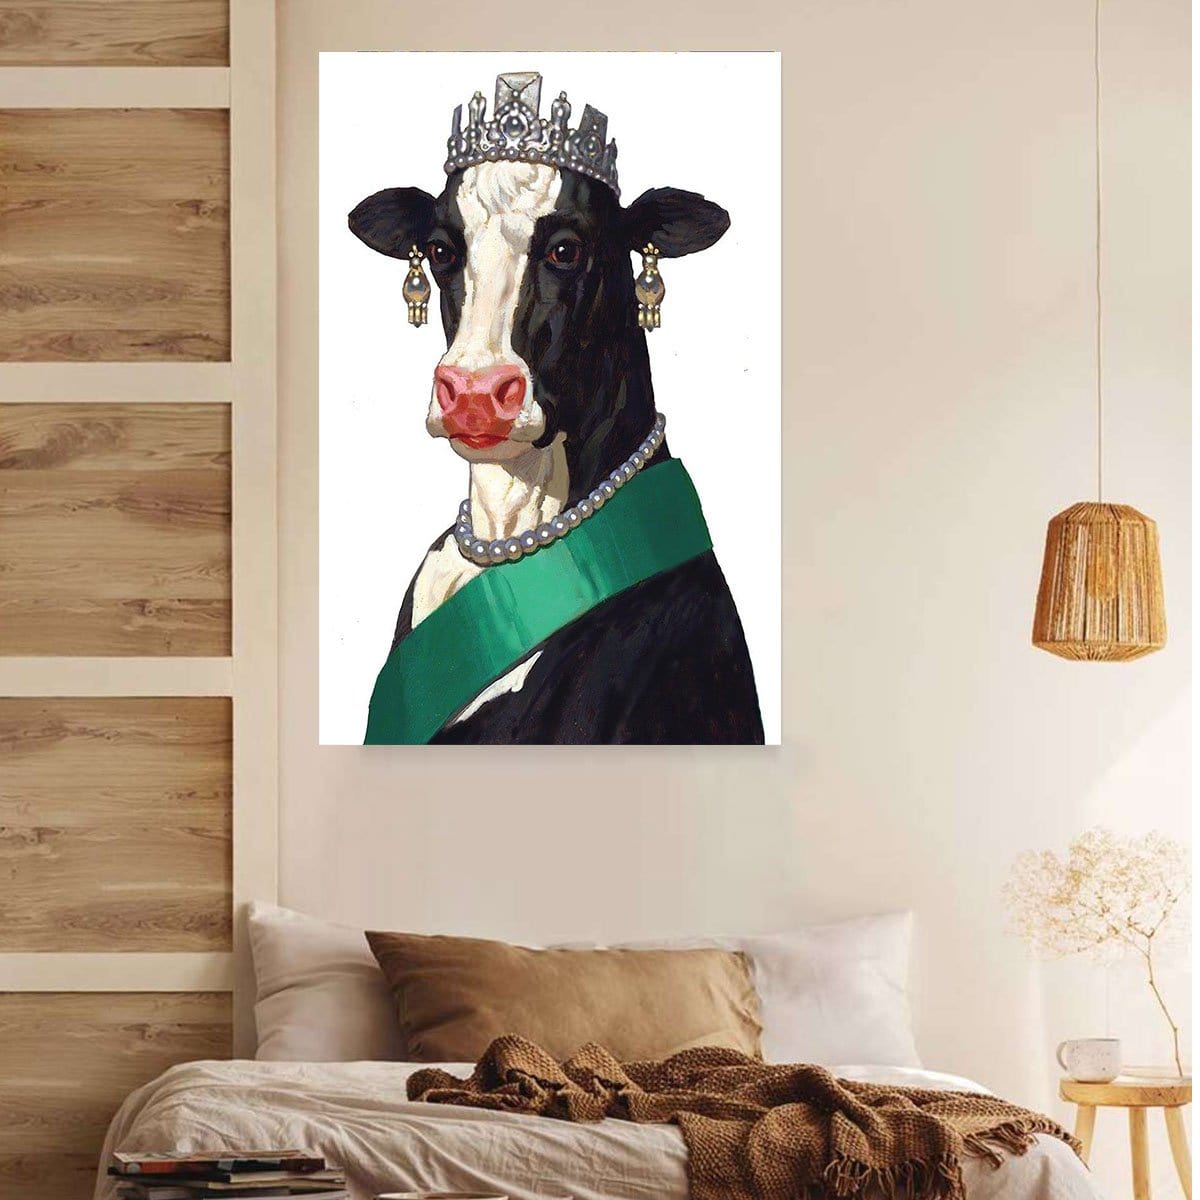 Hobby Lobby Cow Canvas Cow Wall Decor At Home – BigProStore